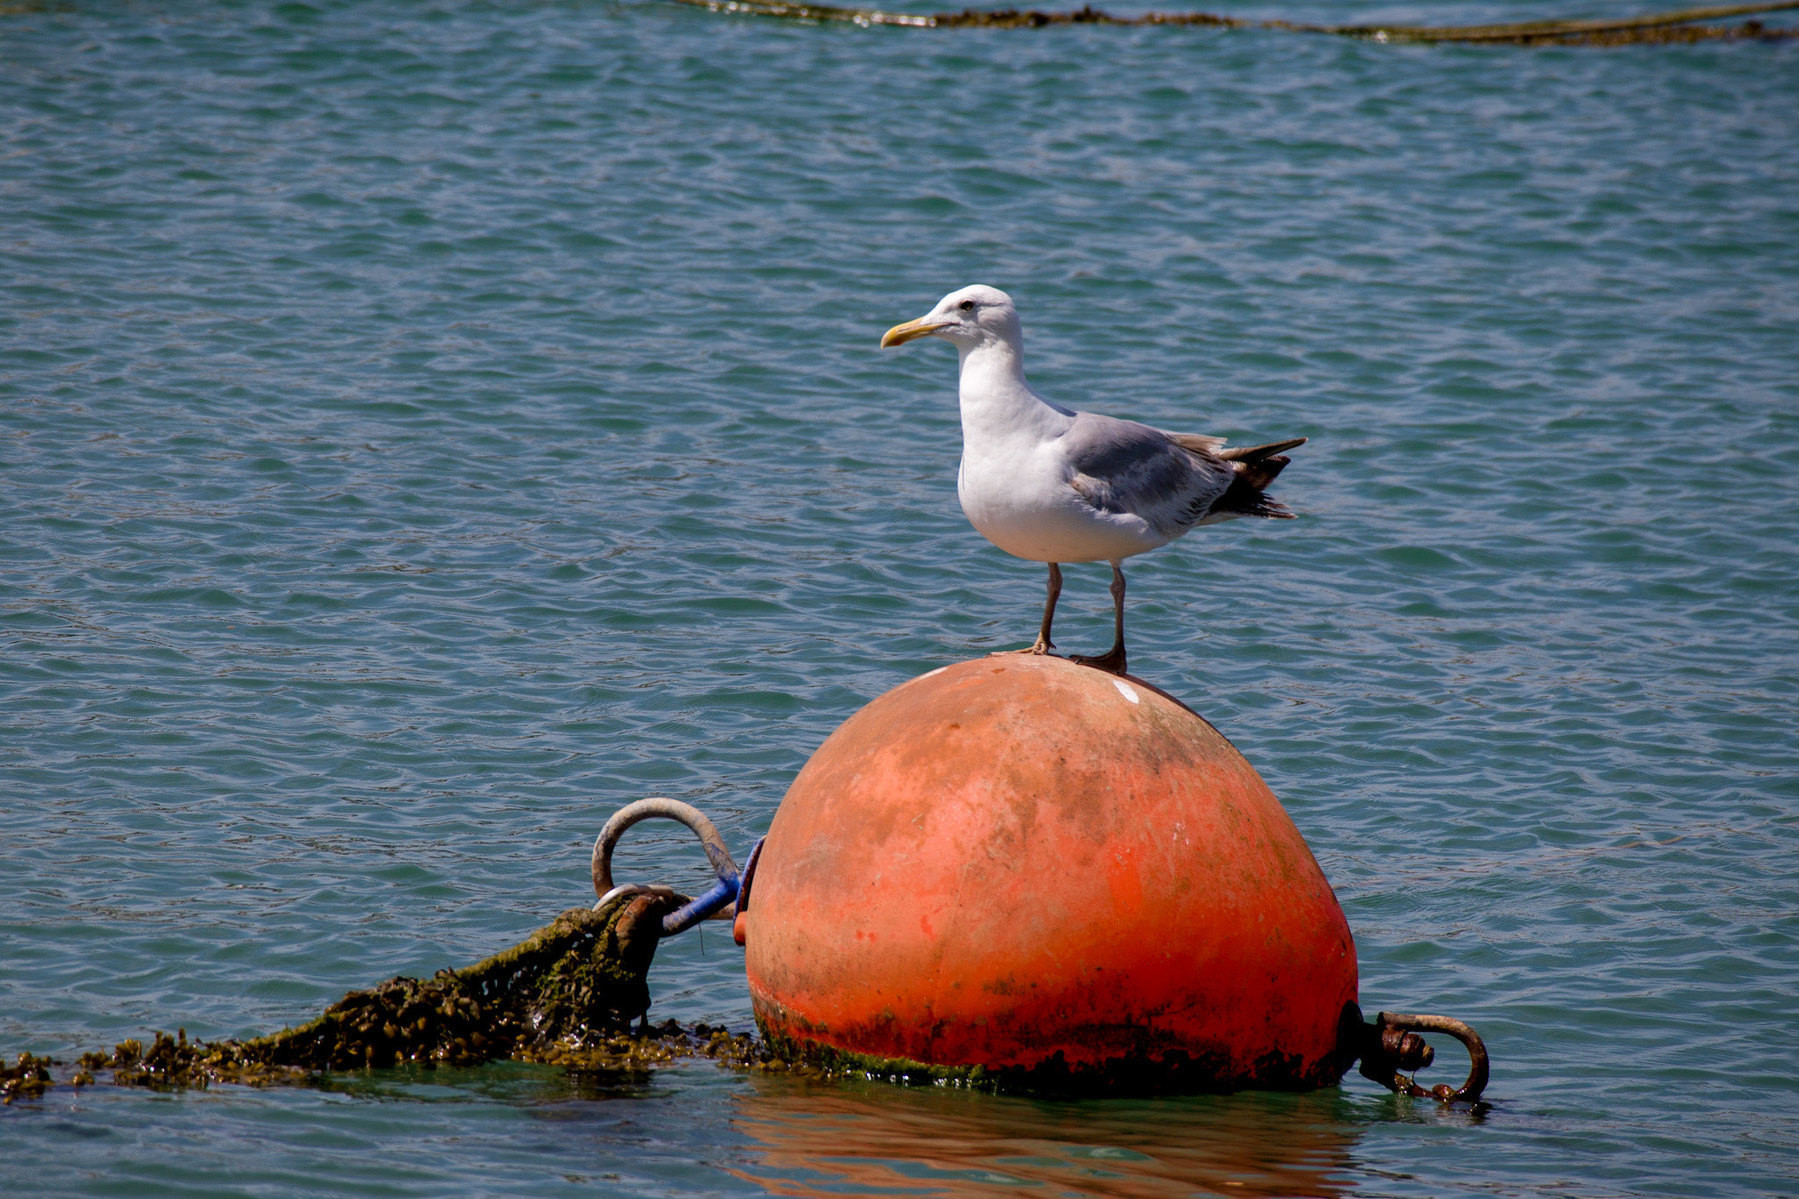 A seagull on s bouy in the river Adur